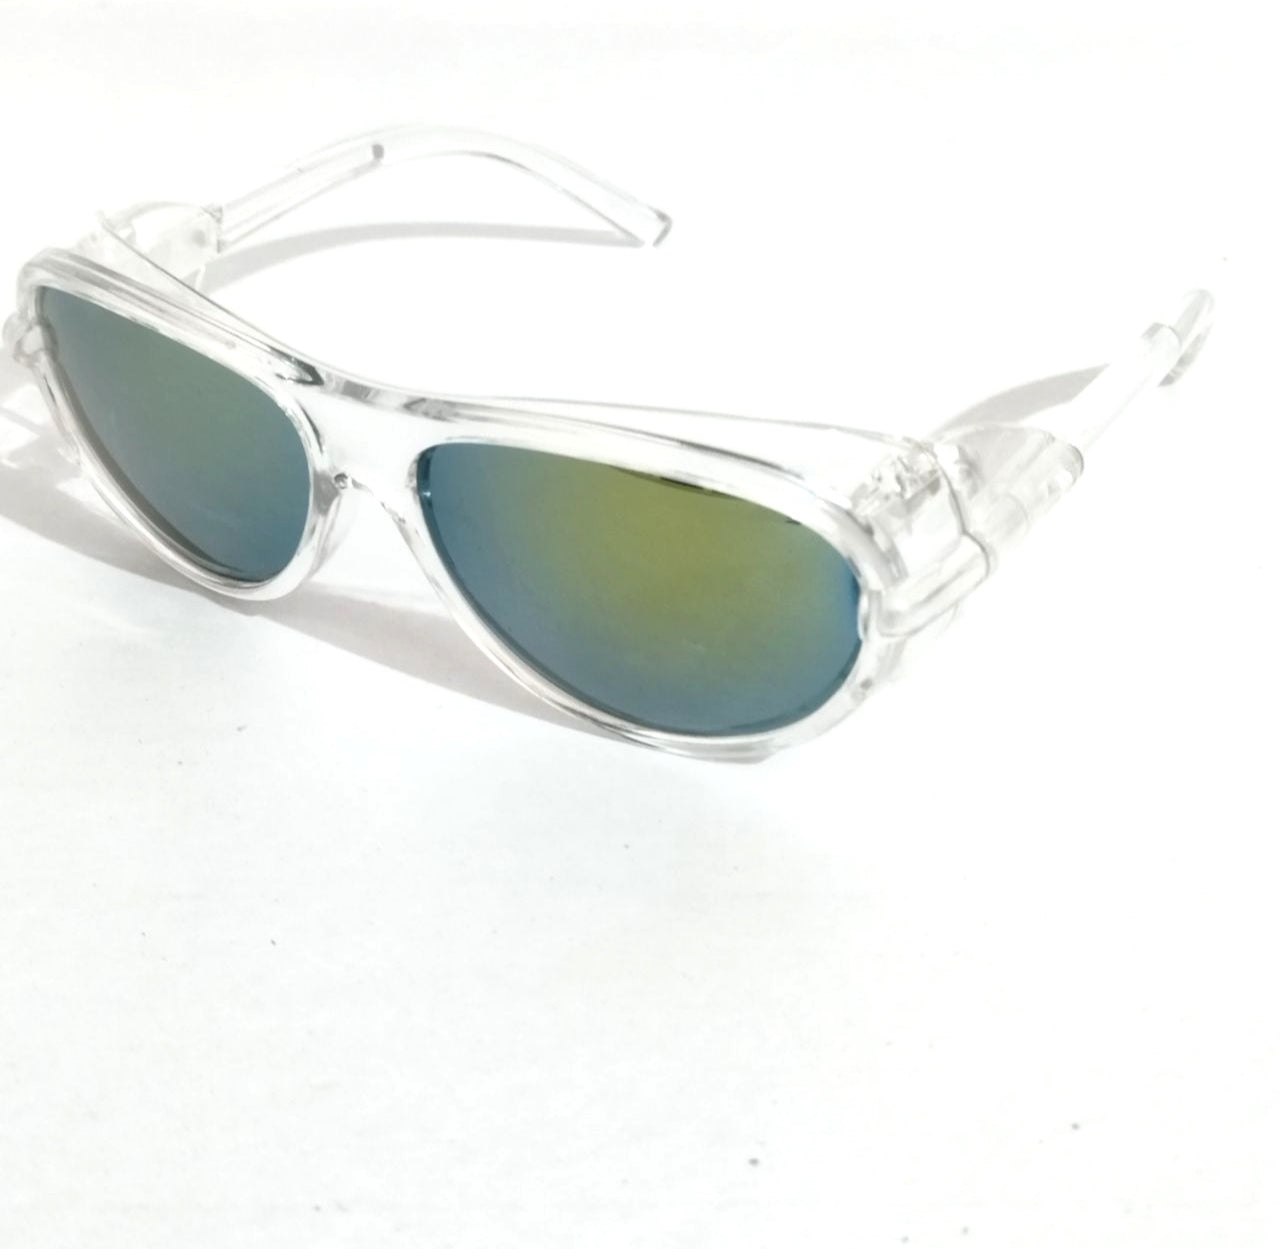 Green Mirror Driving Sunglasses with Side Shield